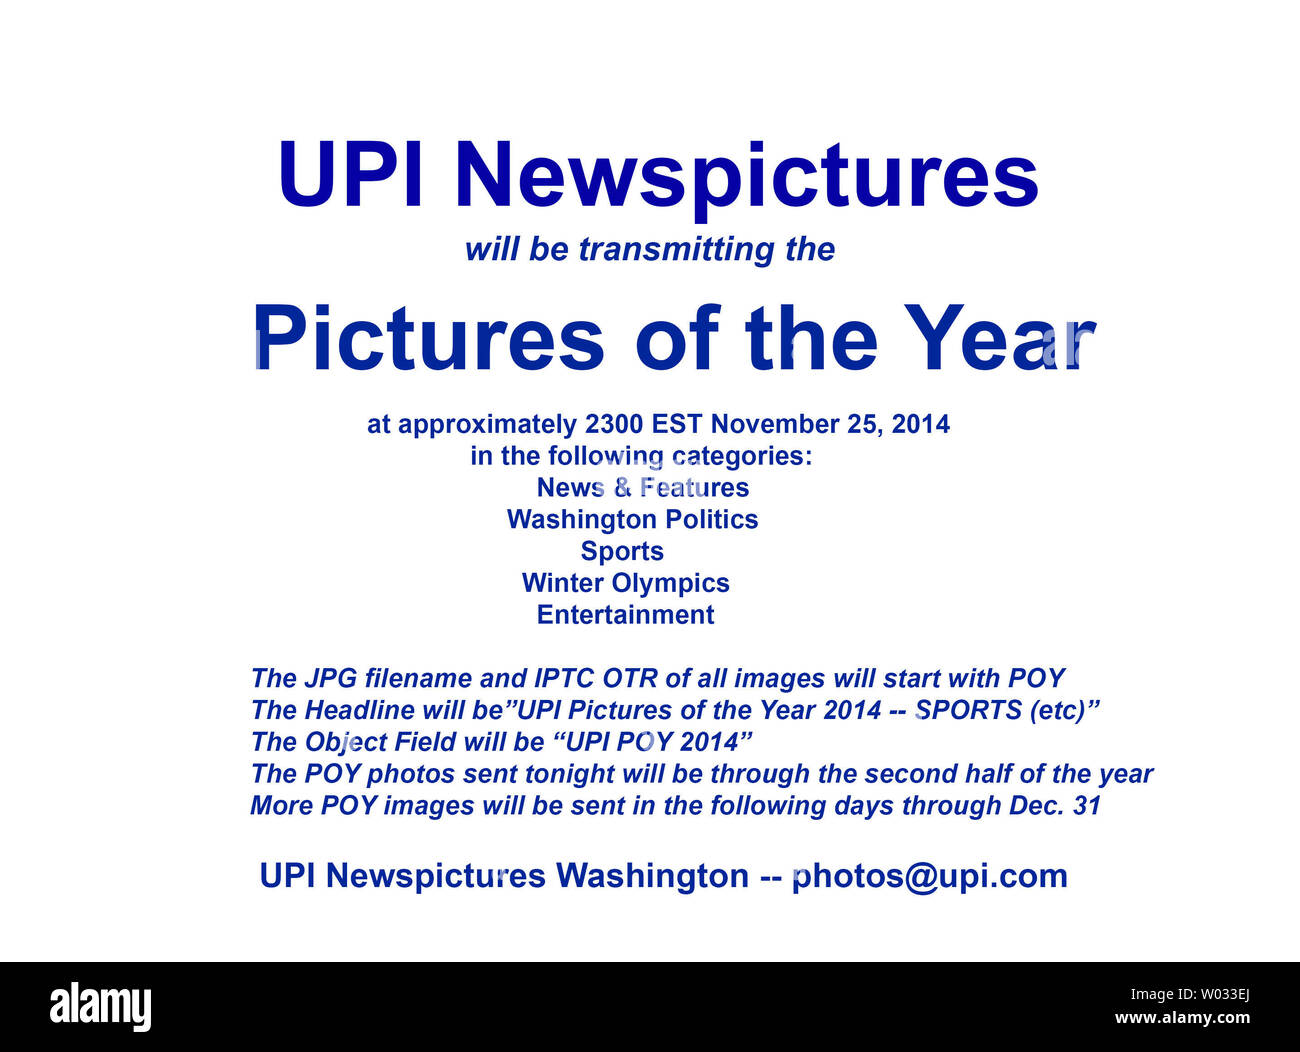 UPI Newspictures will be transmitting the 2014 Pictures of the Year on Tuesday, November 18, 2014 at approximately 2300 EST (0400GMT) in the following categories:  News & Features, Washington Politics, Sports, Winter Olympics, and Entertainment.  The images transmitted tonight will encompass the second half of the year 2014, and more images will move through the end of the year. The JPG filename and IPTC OTR of all images will start with POY.  The Headline will be 'UPI Pictures of the Year 2014 - Sports (and so on).  The Object Field will be 'UPI POY 2014'.    UPI Washington  photos@upi.com Stock Photo